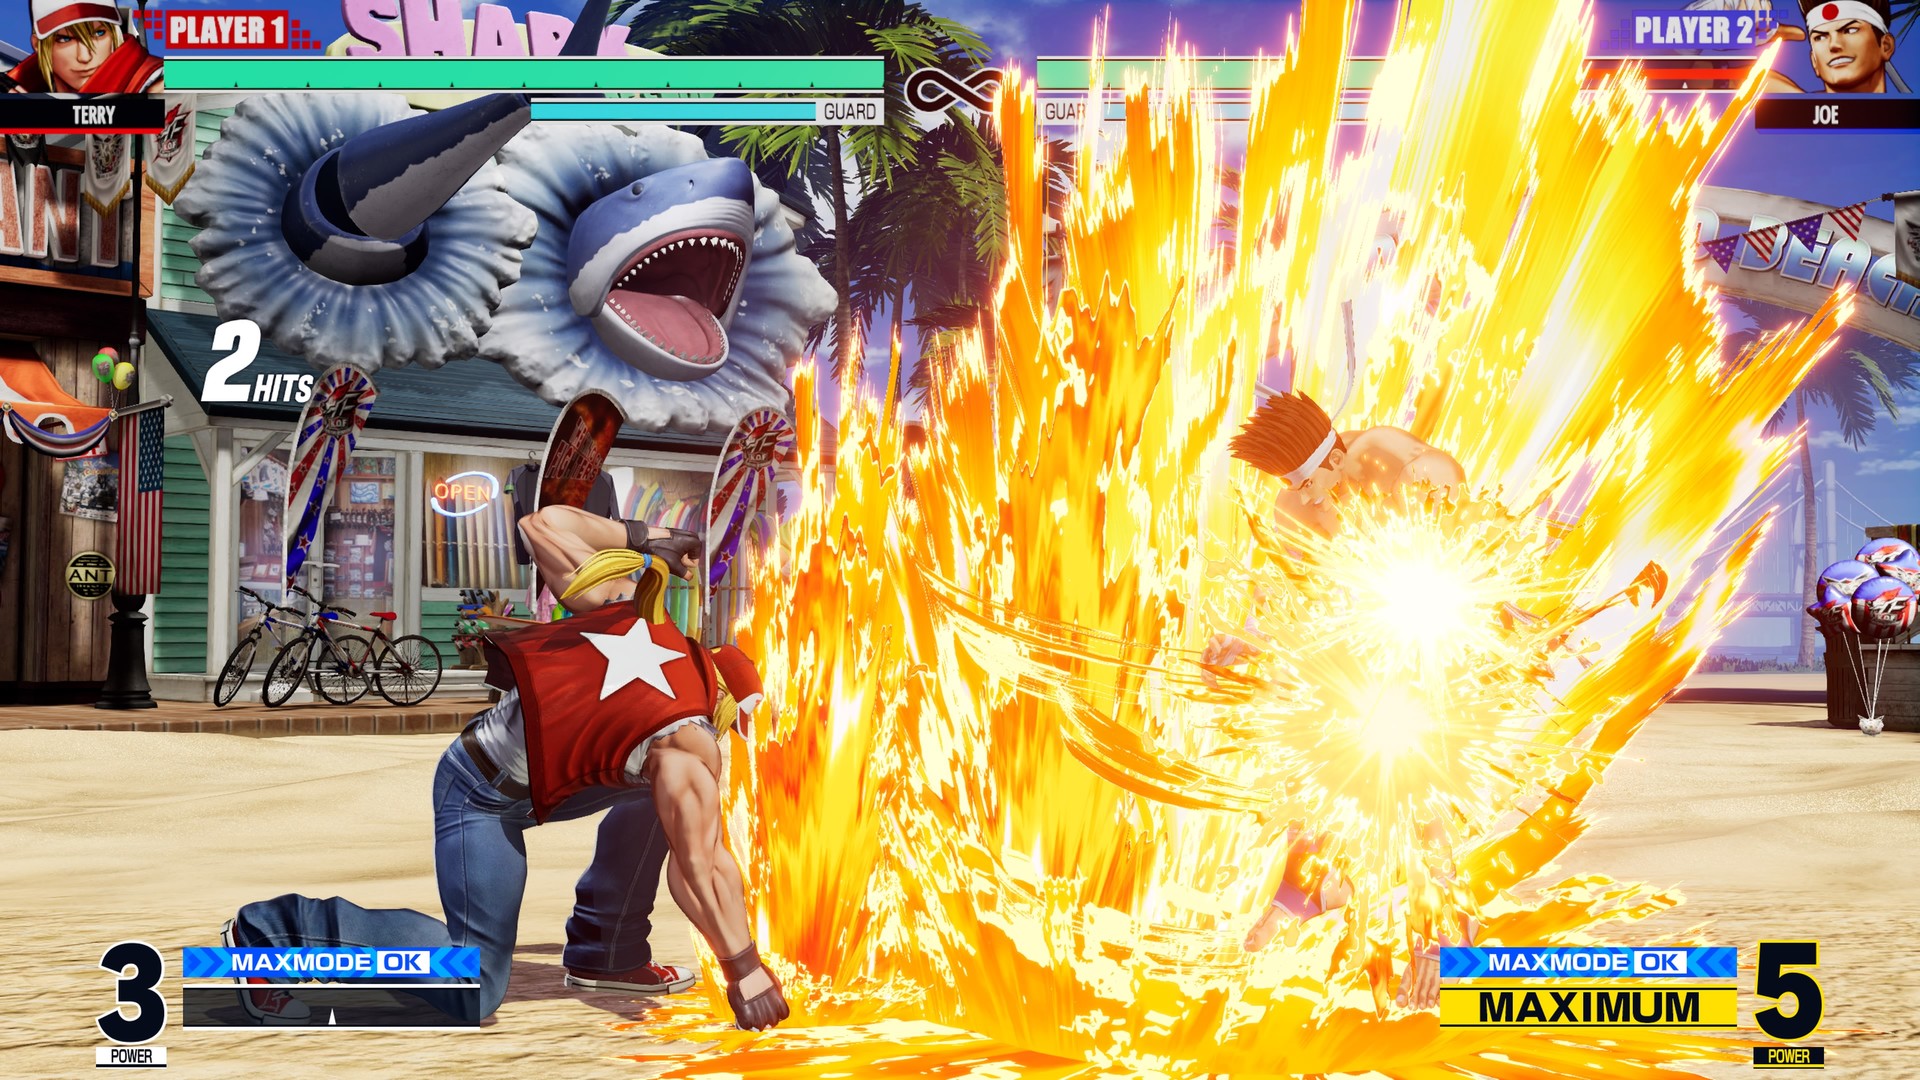 download The King of Fighters XV via torrent